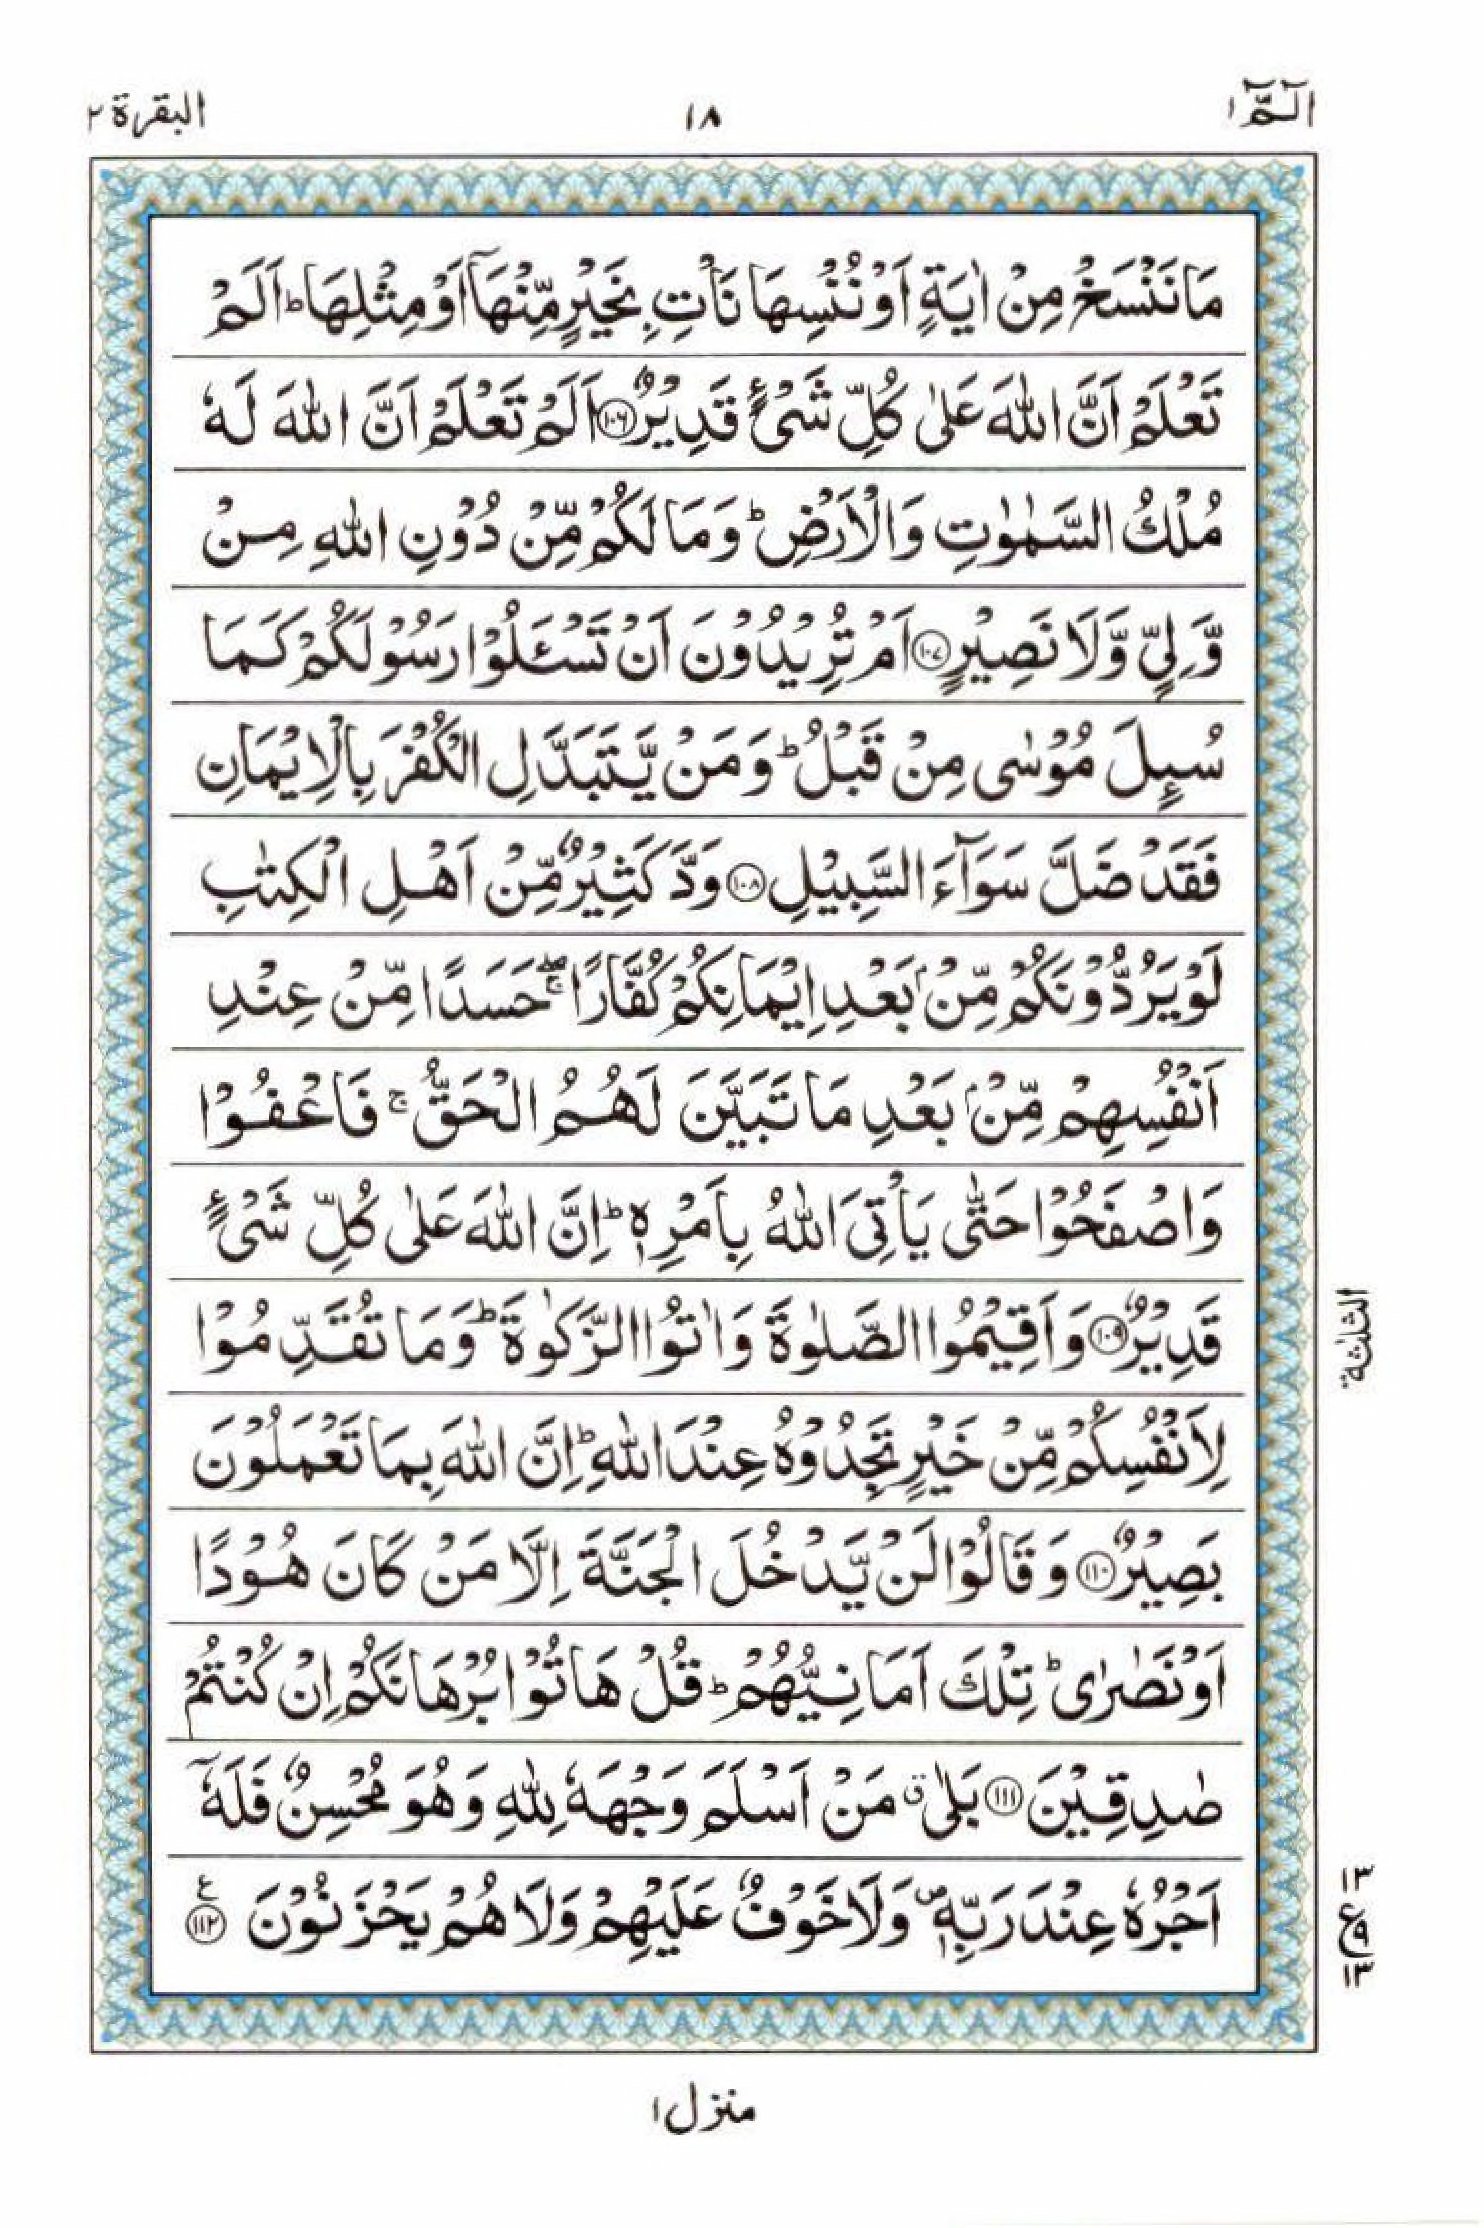 Read 15 Lines Quran, Part / Chapter / Siparah 1 Page 18